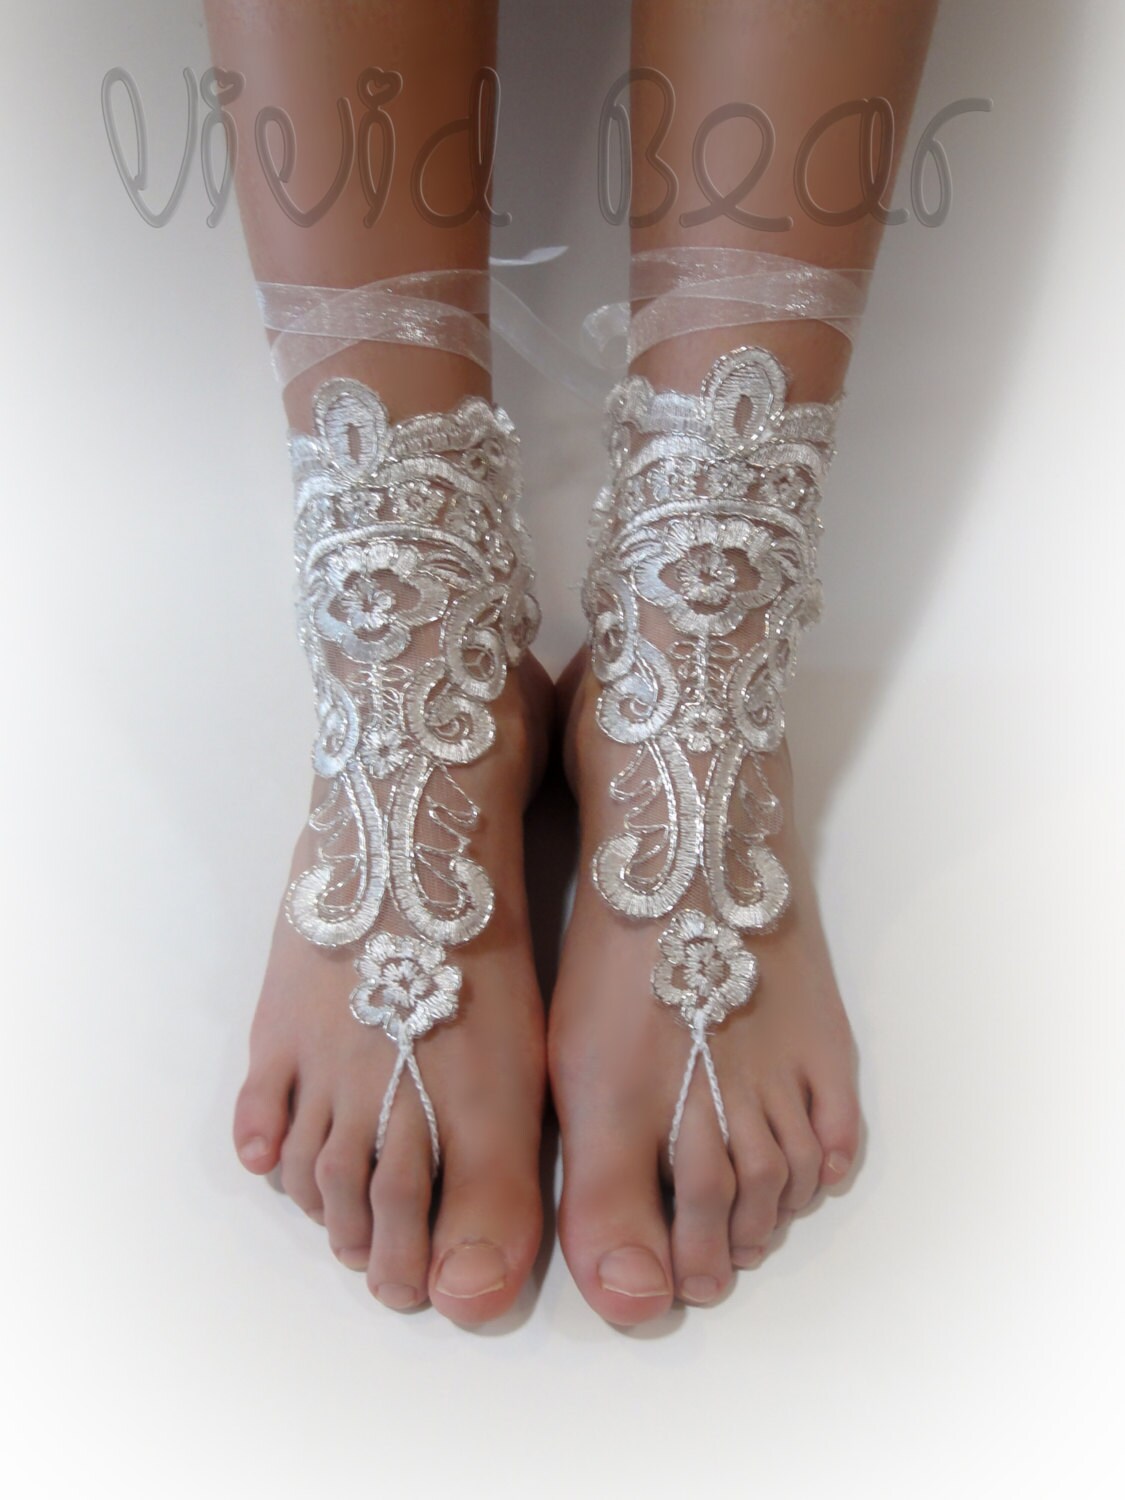 Ivory Silver Lace Barefoot Sandals. Foot Jewelry. Anklets. - Etsy